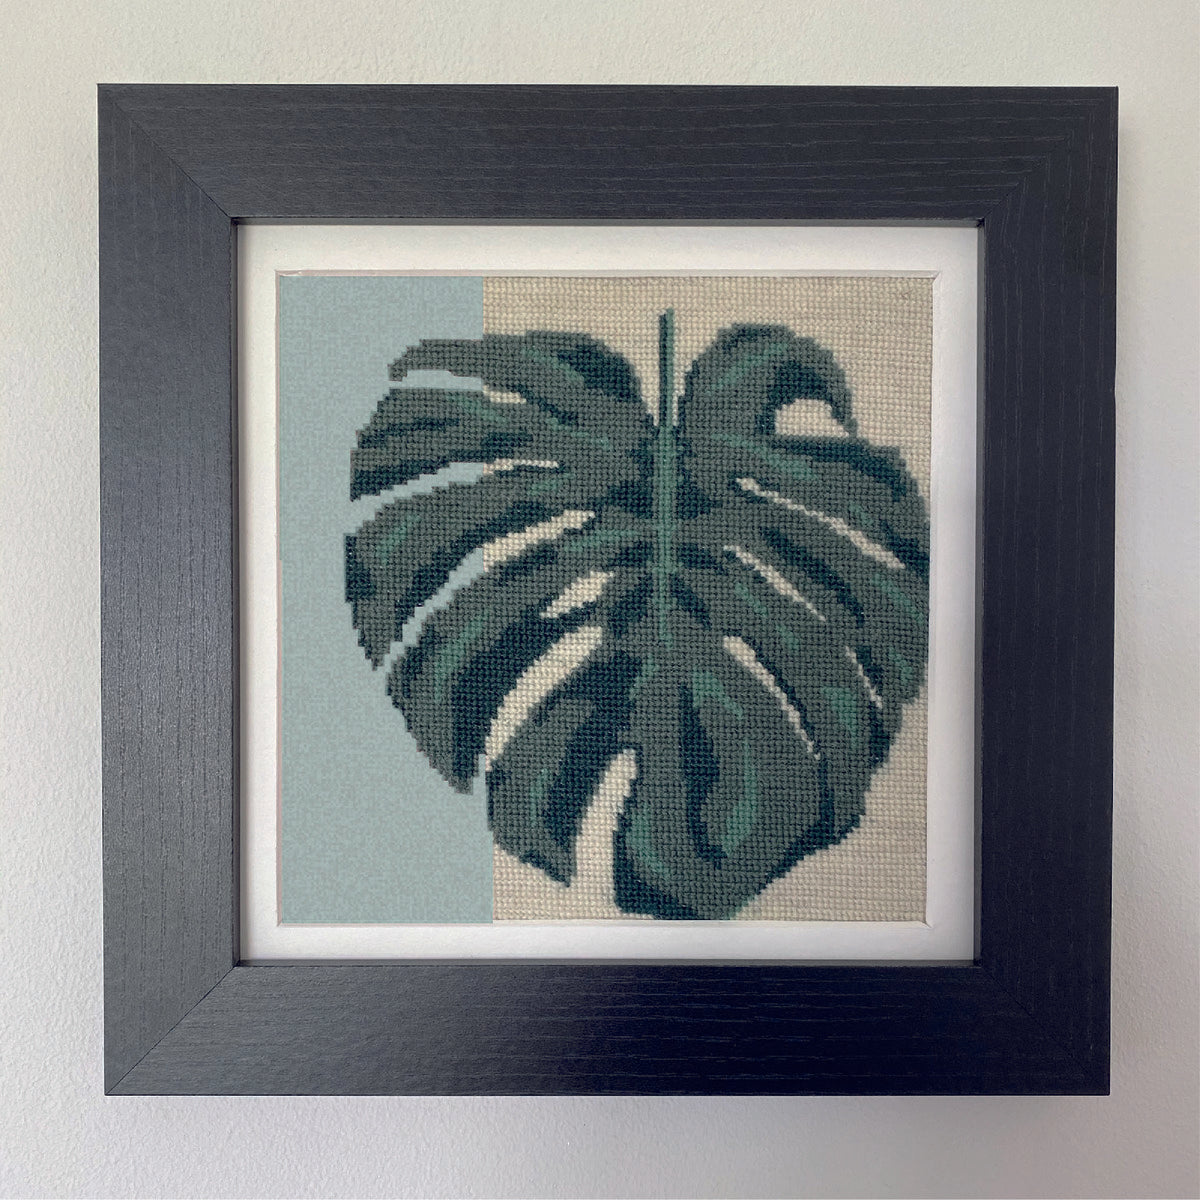 A detailed monstera leaf tapestry kit for adults. Featuring shades of green with a minimal background design.